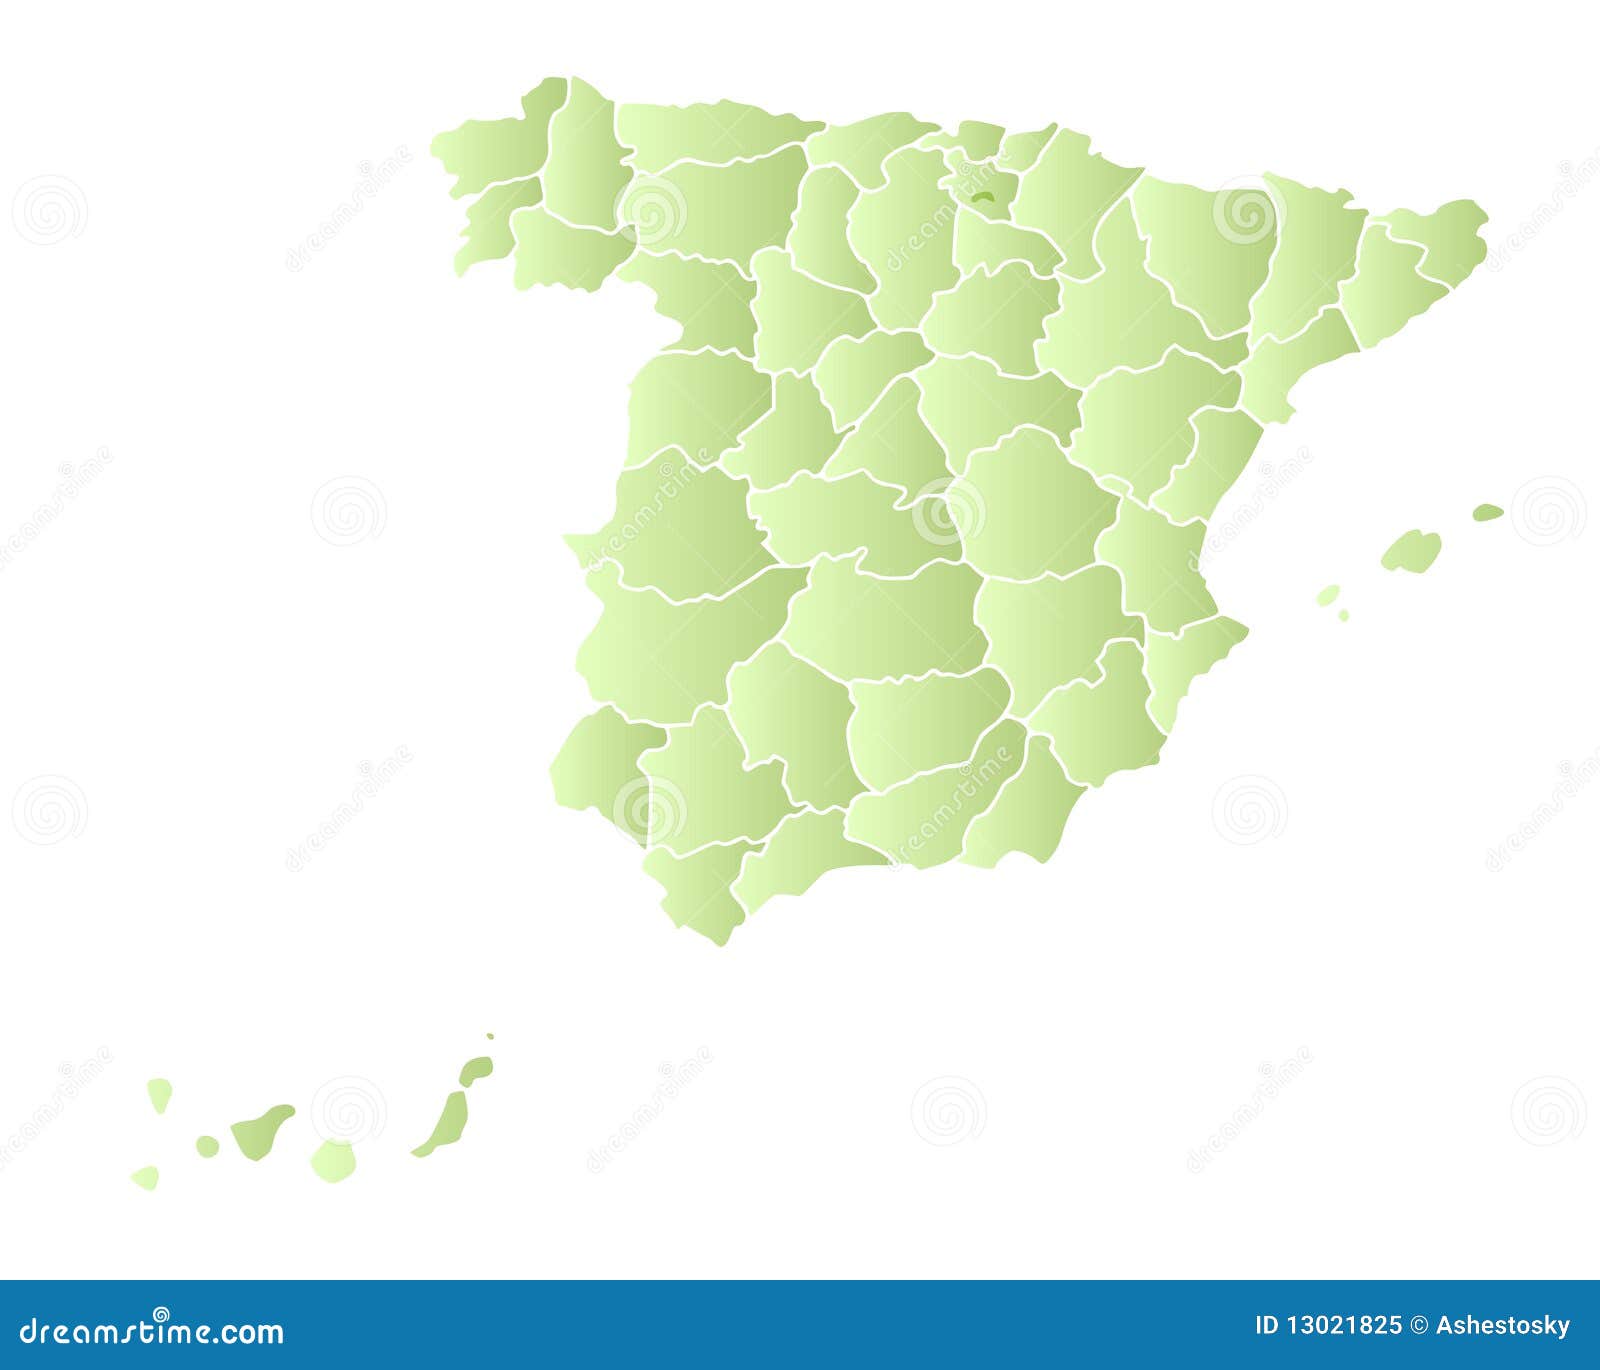 spain map with provinces